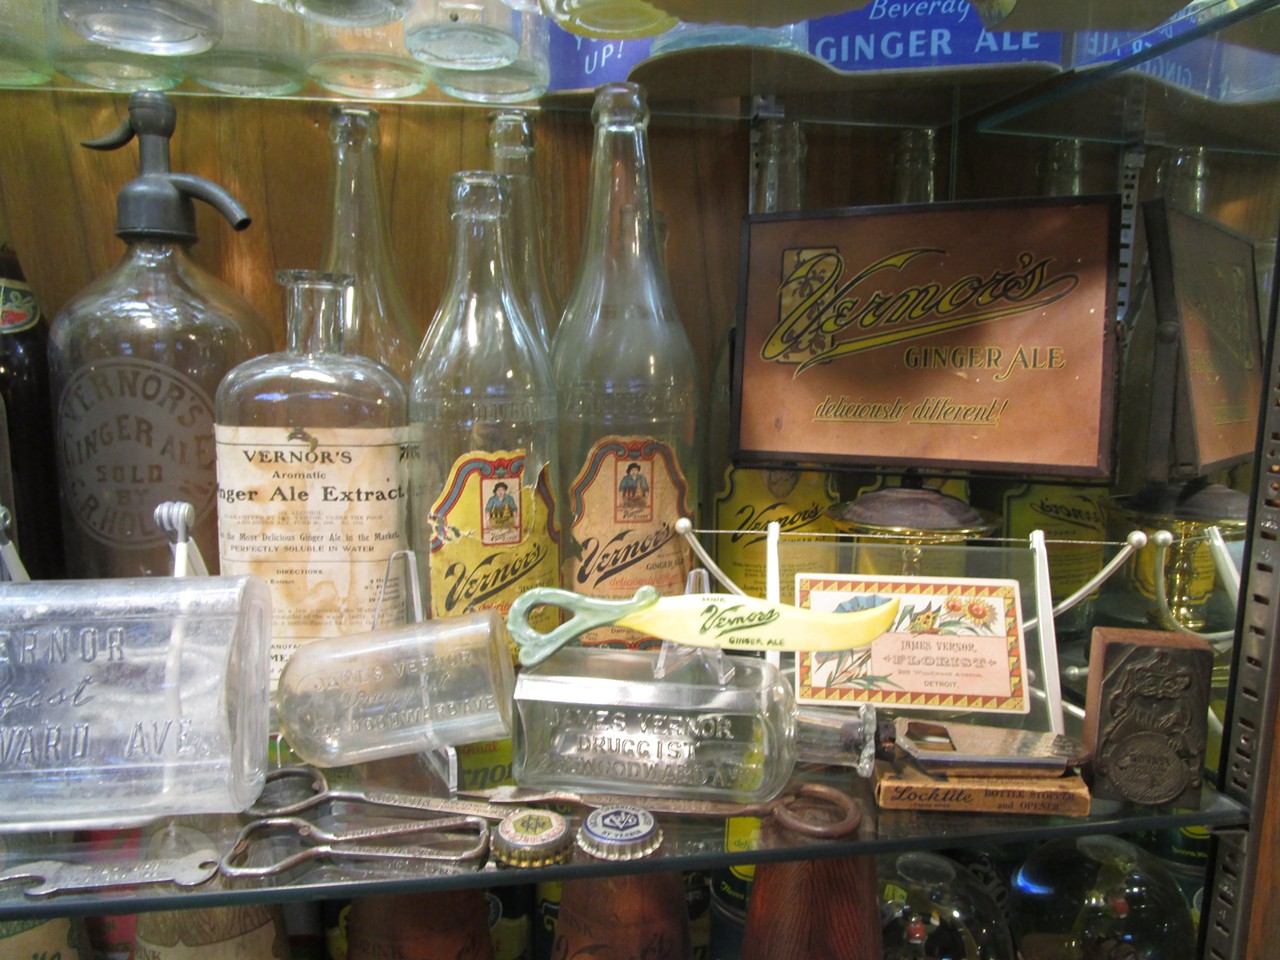 Of course, much of Wunderlich's collection consists of bottles, some of them very old, as well as bottle openers, even the occasional letter opener.